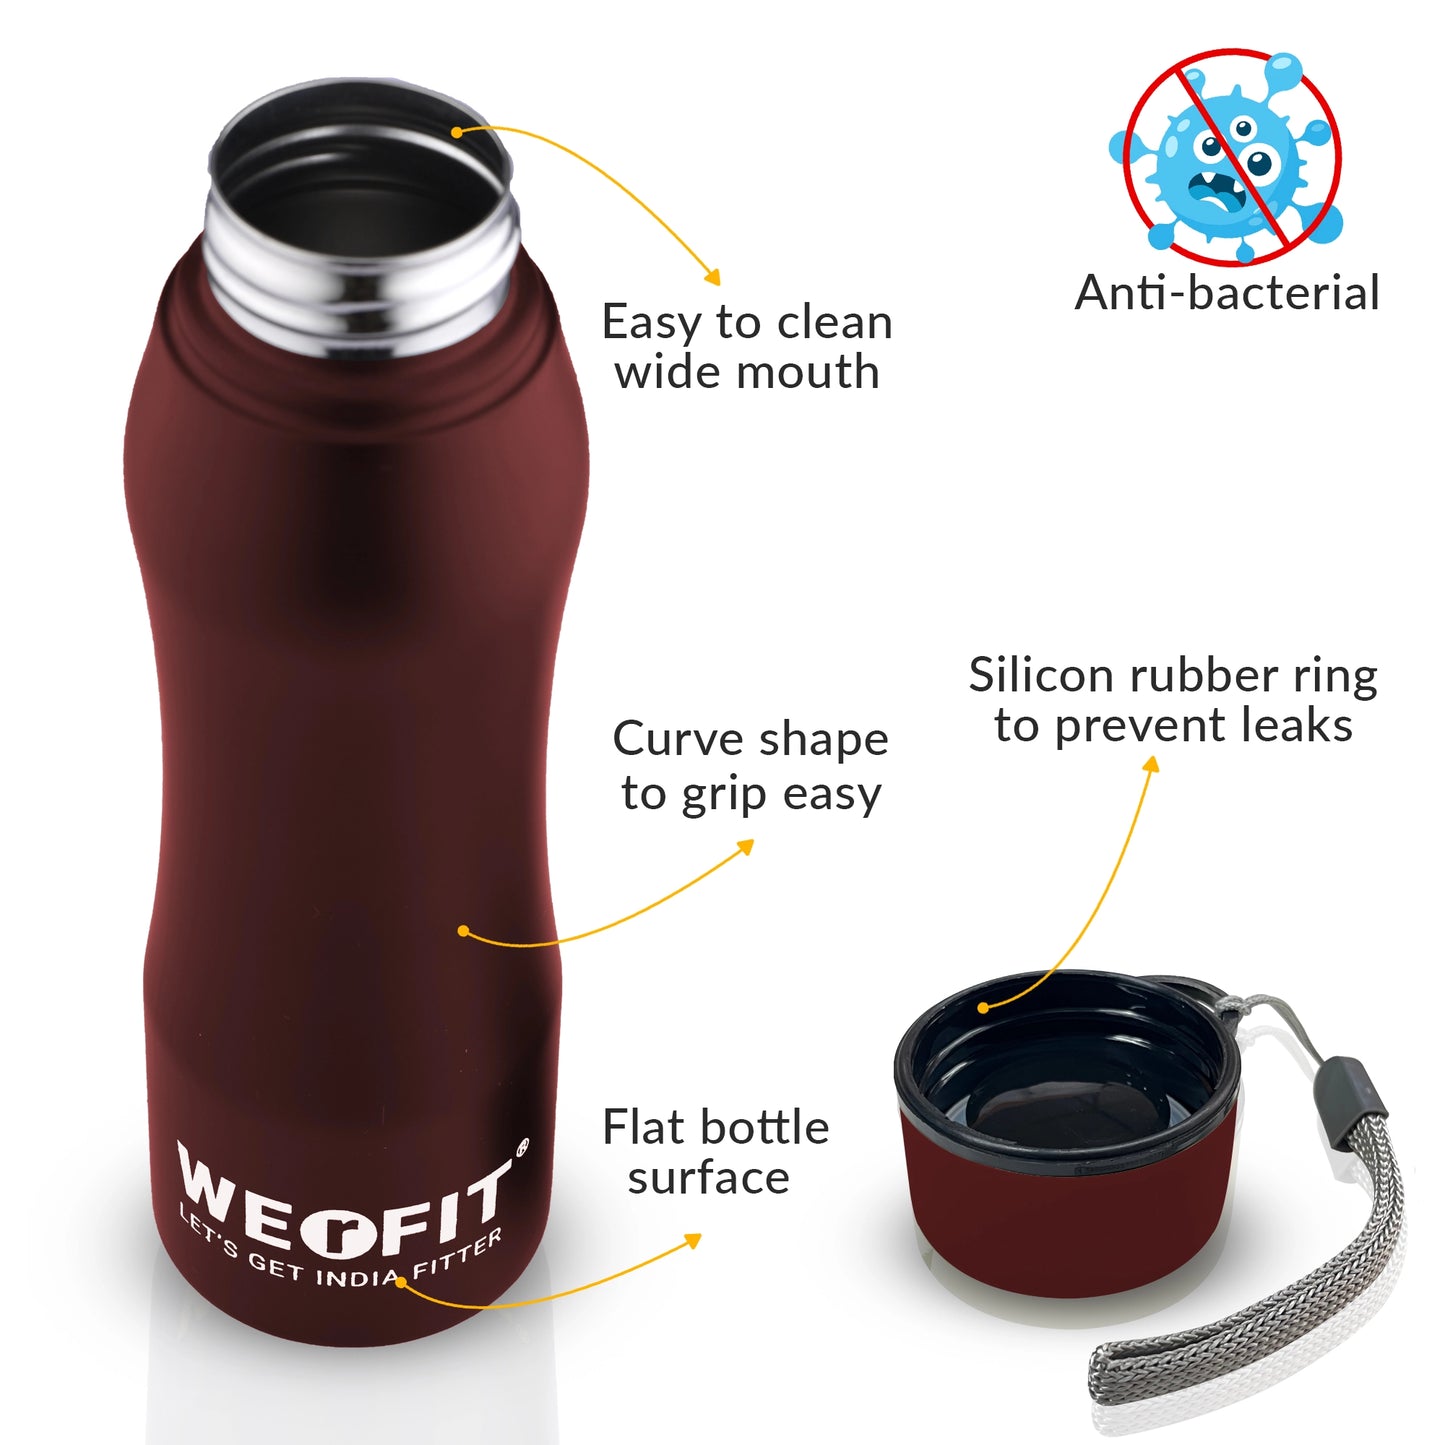 WErFIT Stainless Steel Water Bottle for Gym Park Cycling Yoga Office School Sports 900 ml Shaker  (Pack of 1, Red, Steel)